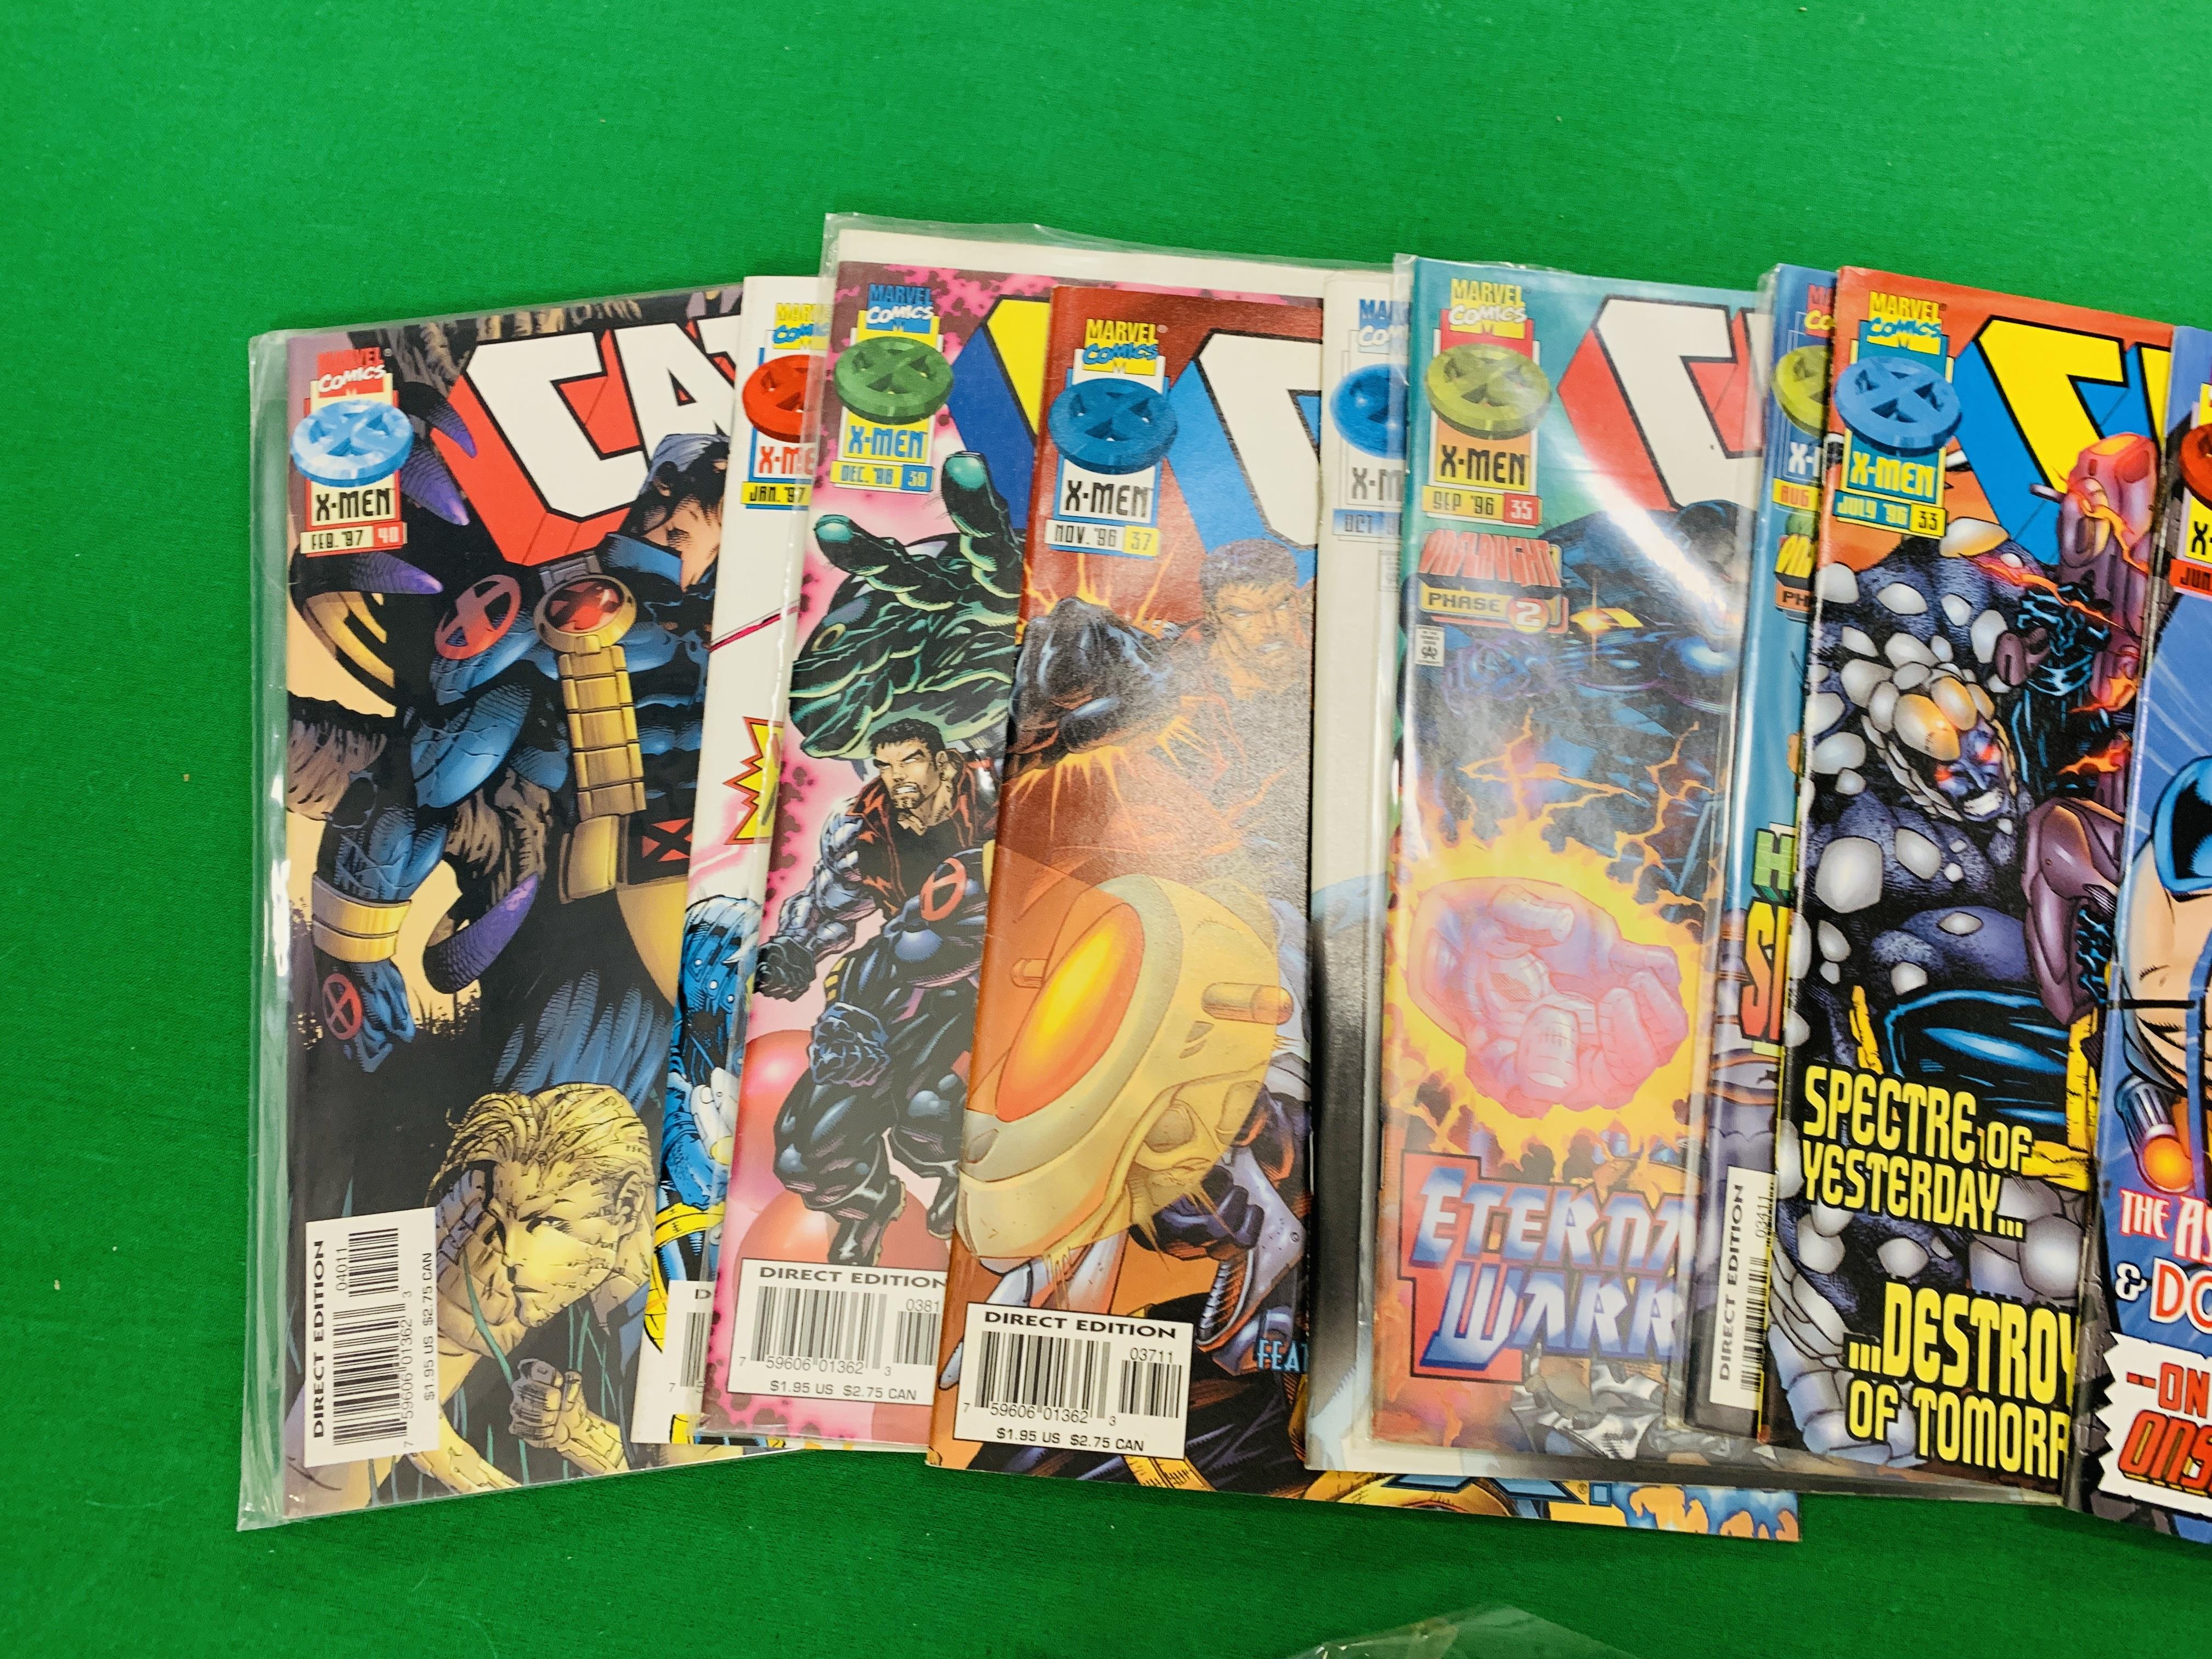 MARVEL COMICS CABLE NO. 1 - 40 FROM 1993. MISSING NO. 25. LIMITED RUN PLUS FLASHBACK. NO. - Image 7 of 7